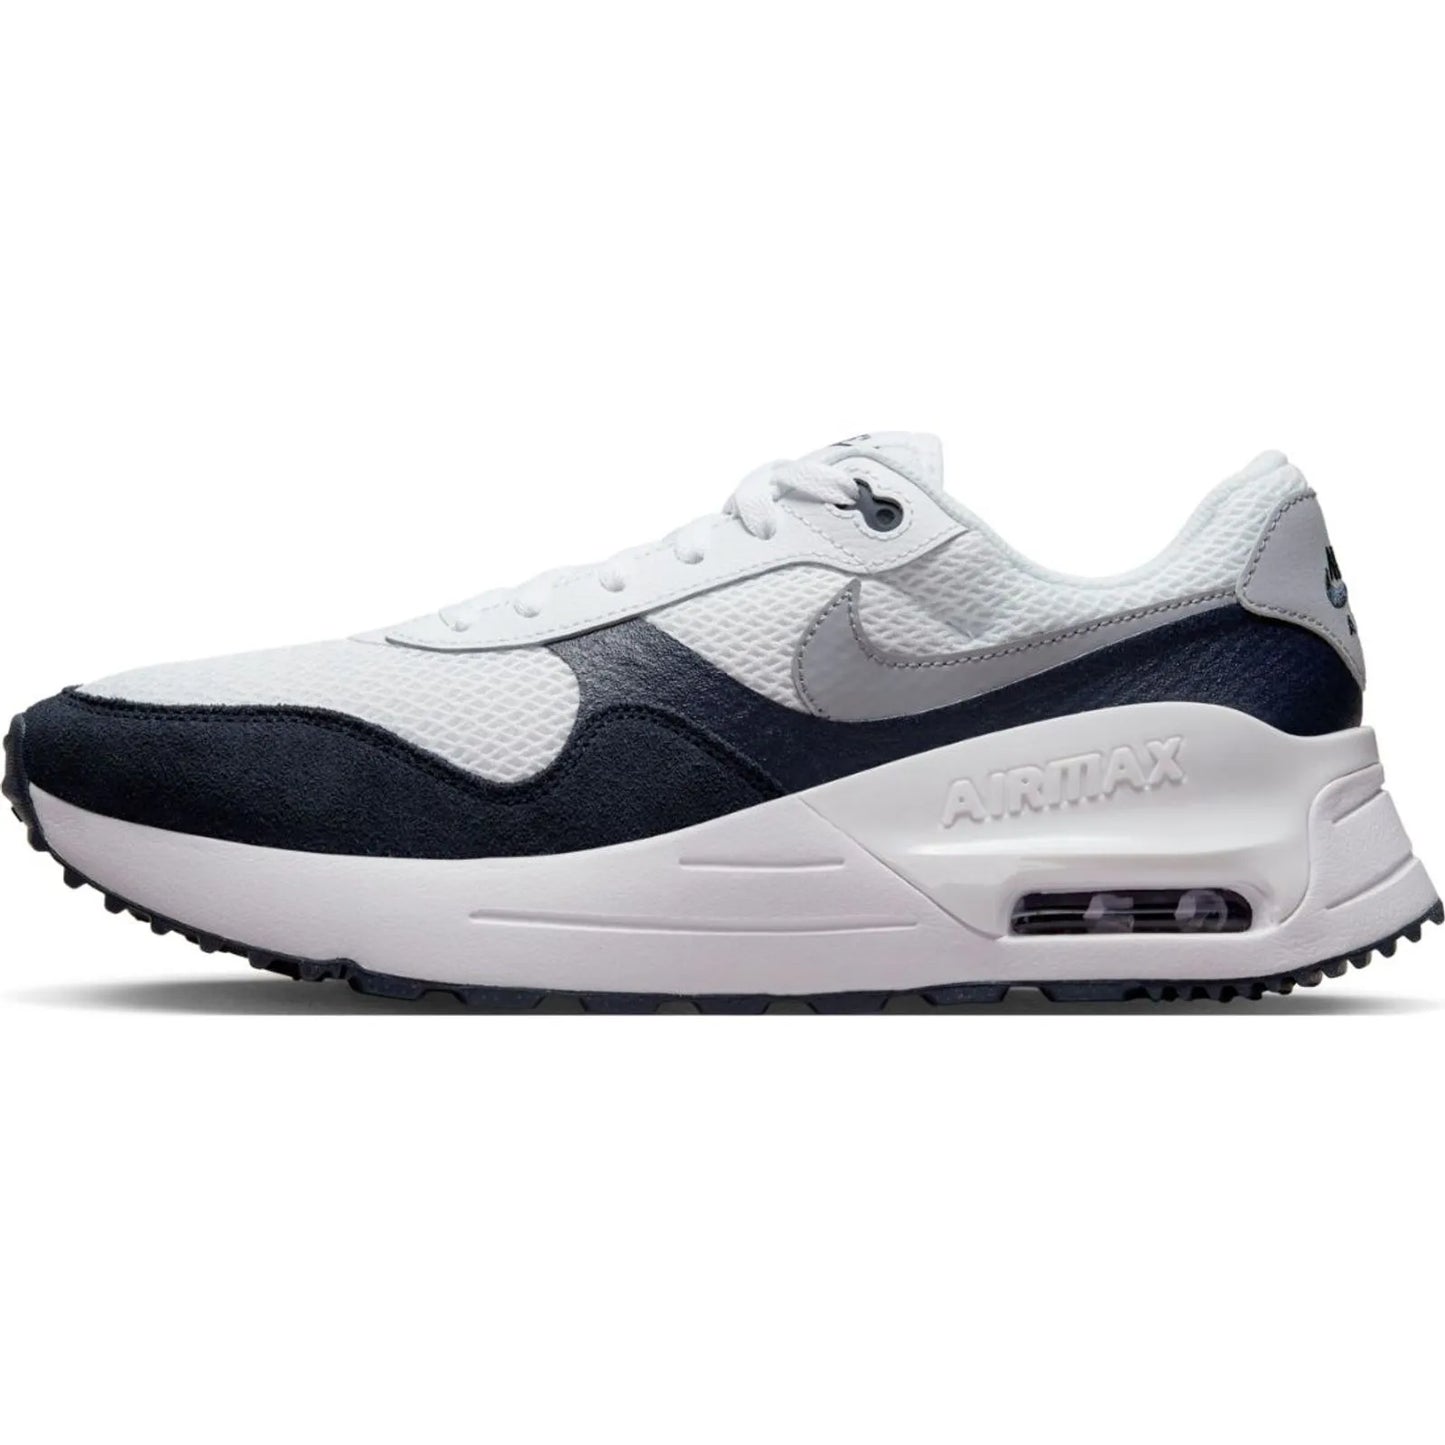 Nike Air Max Systm. Hombre